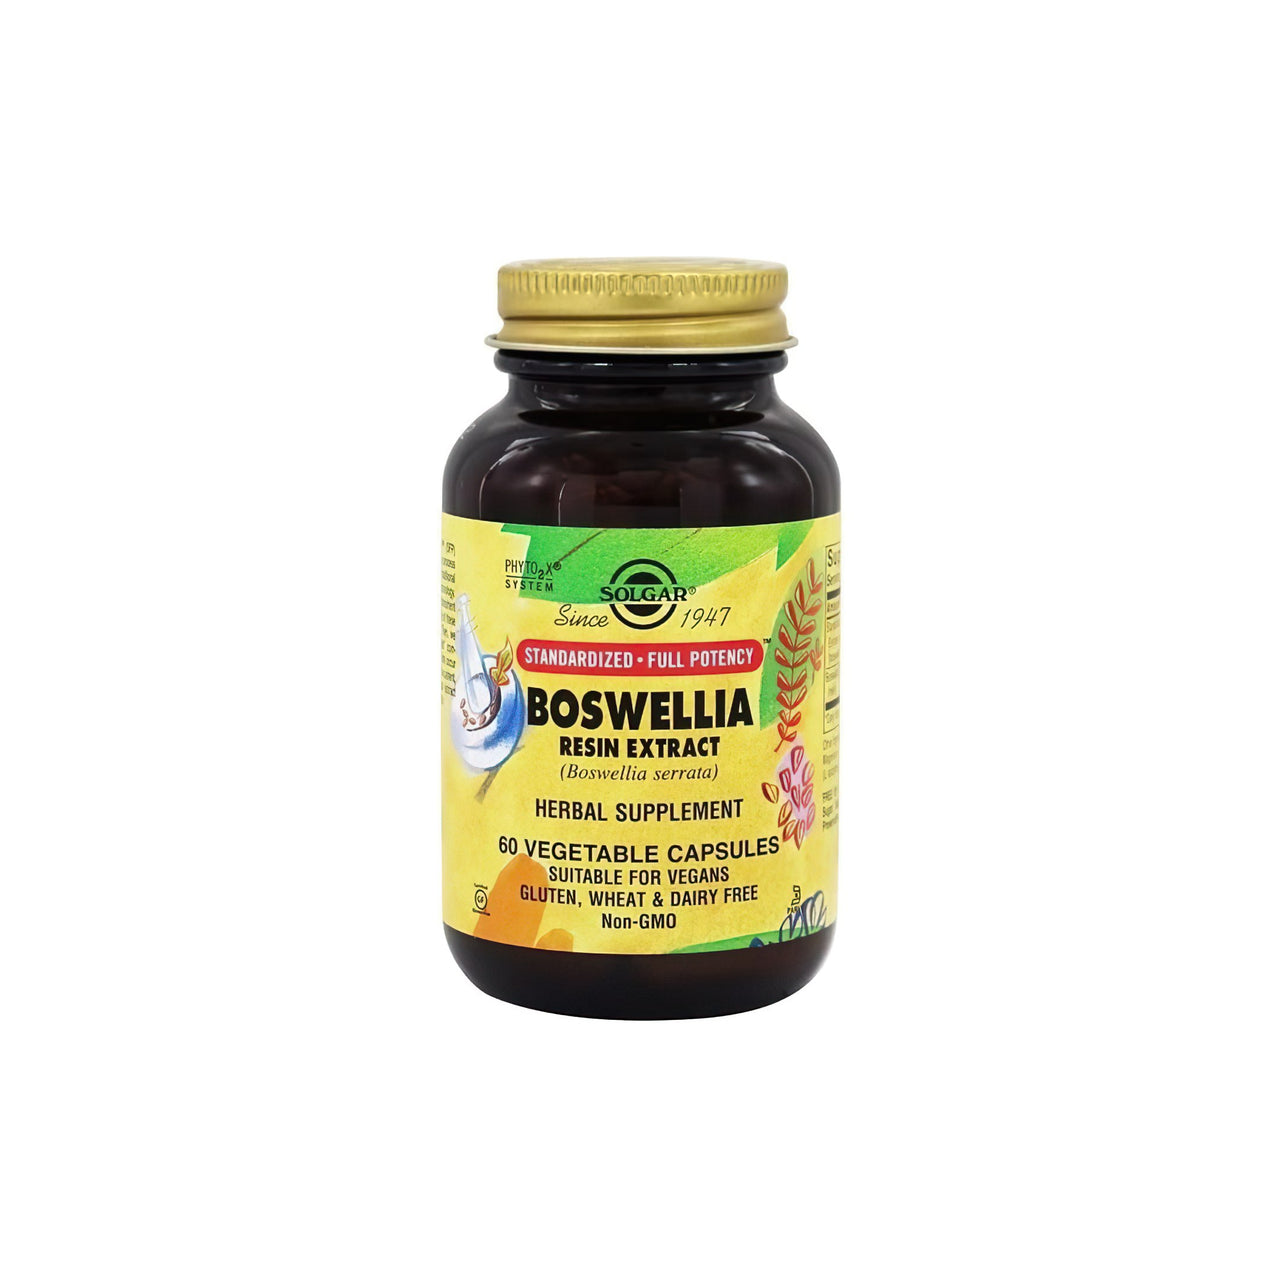 A bottle of SFP Boswellia Resin Extract 60 Vegetable Capsules by Solgar on a white background, promoting joint integrity for the musculoskeletal system.